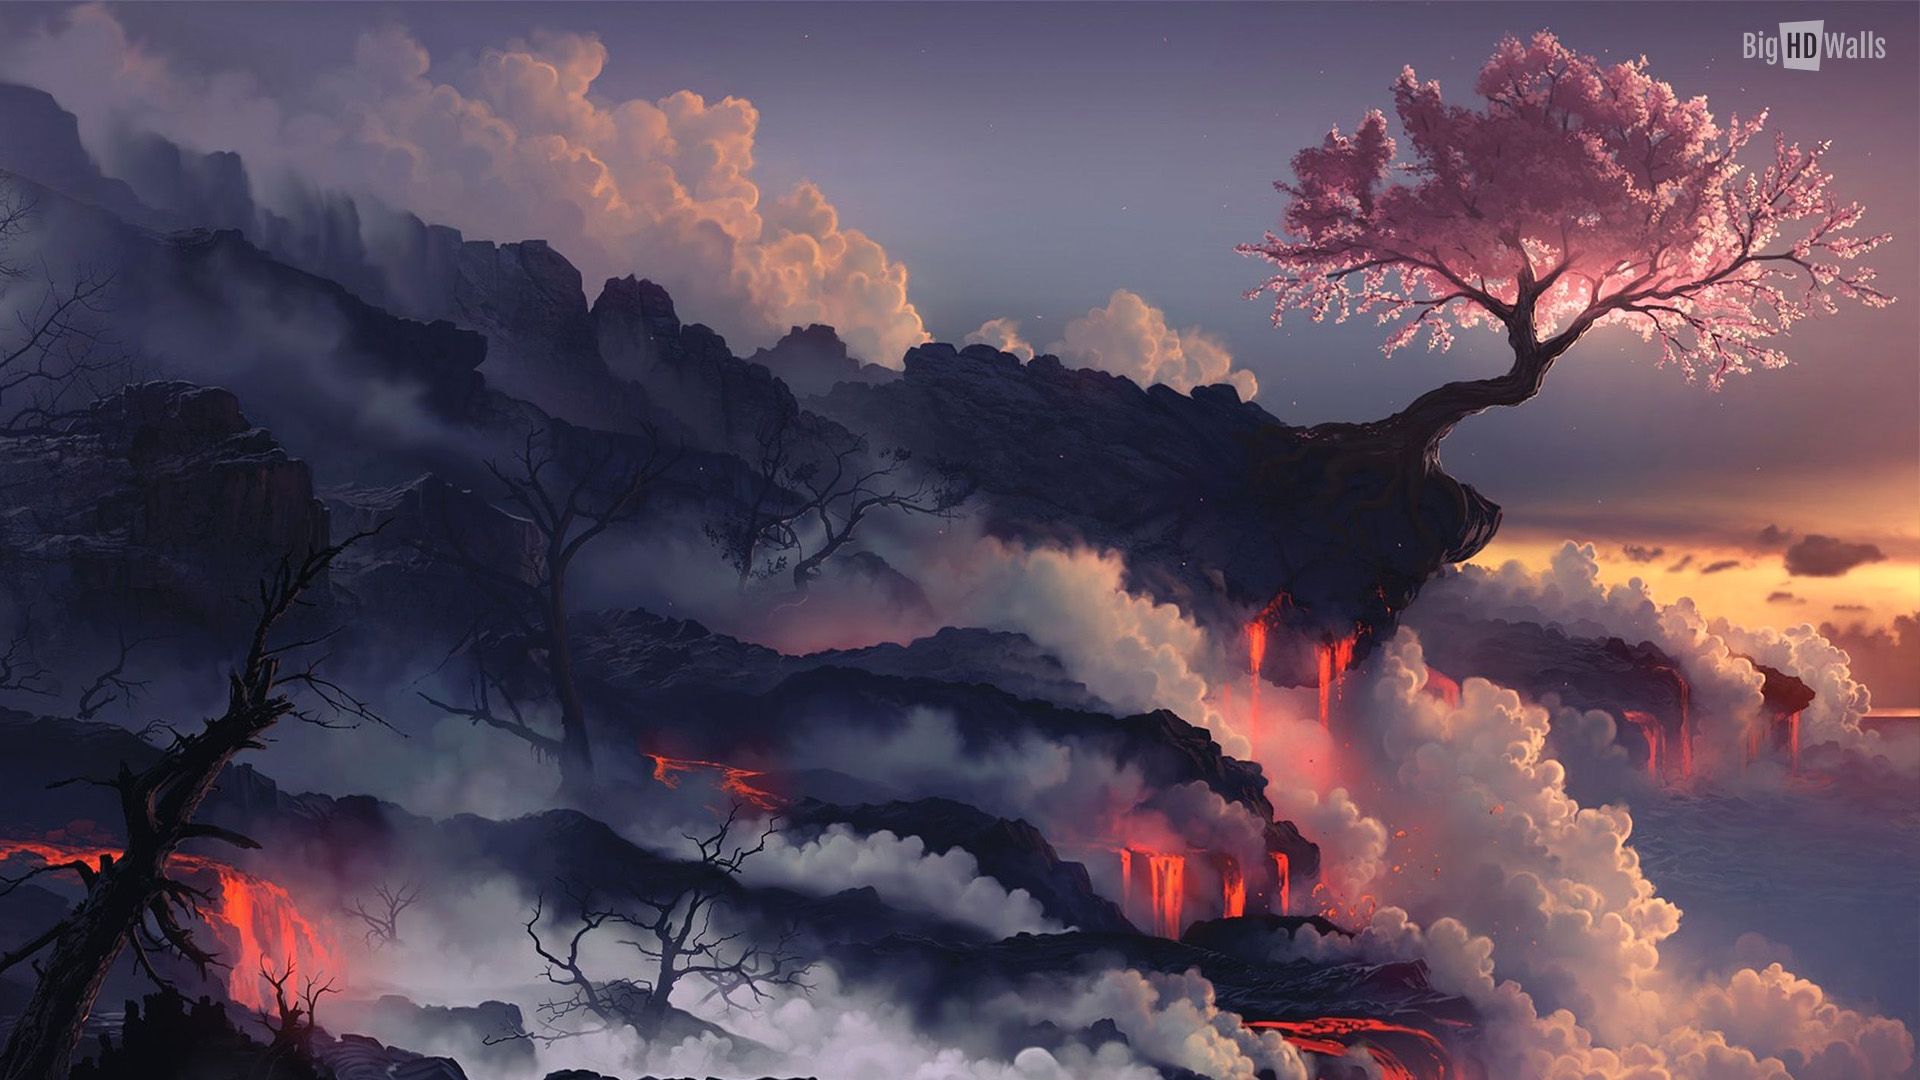 A painting of an island with trees and smoke - Landscape, Japan